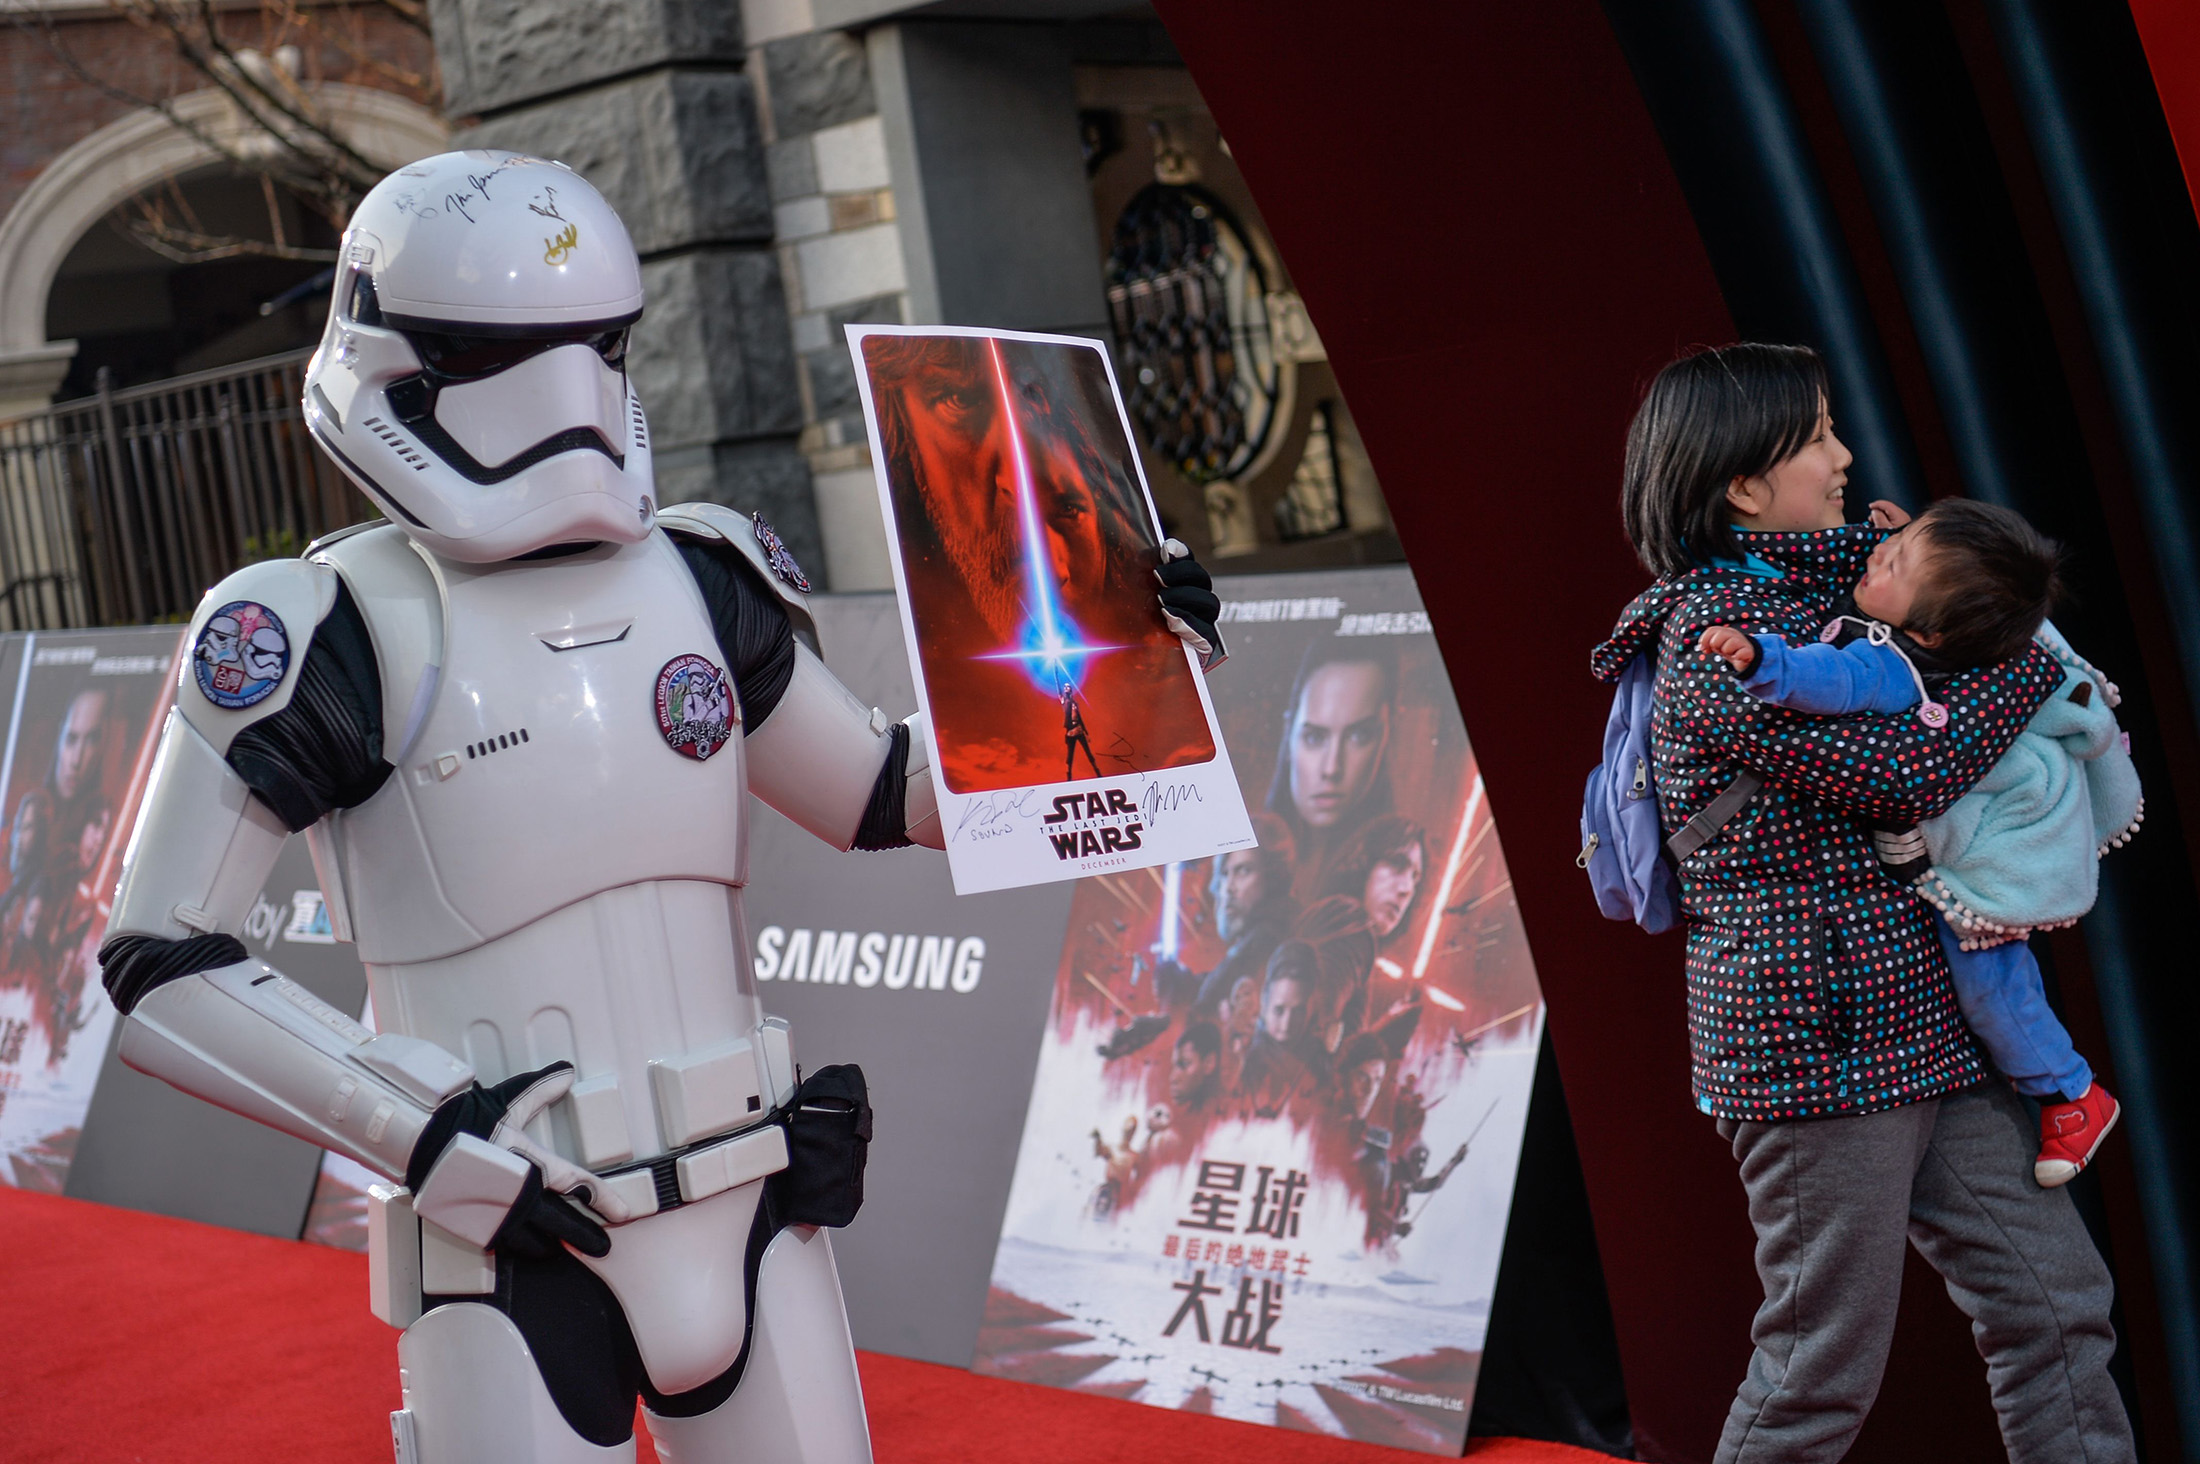 The Last Jedi' Gets a Lackluster Welcome in China - Bloomberg